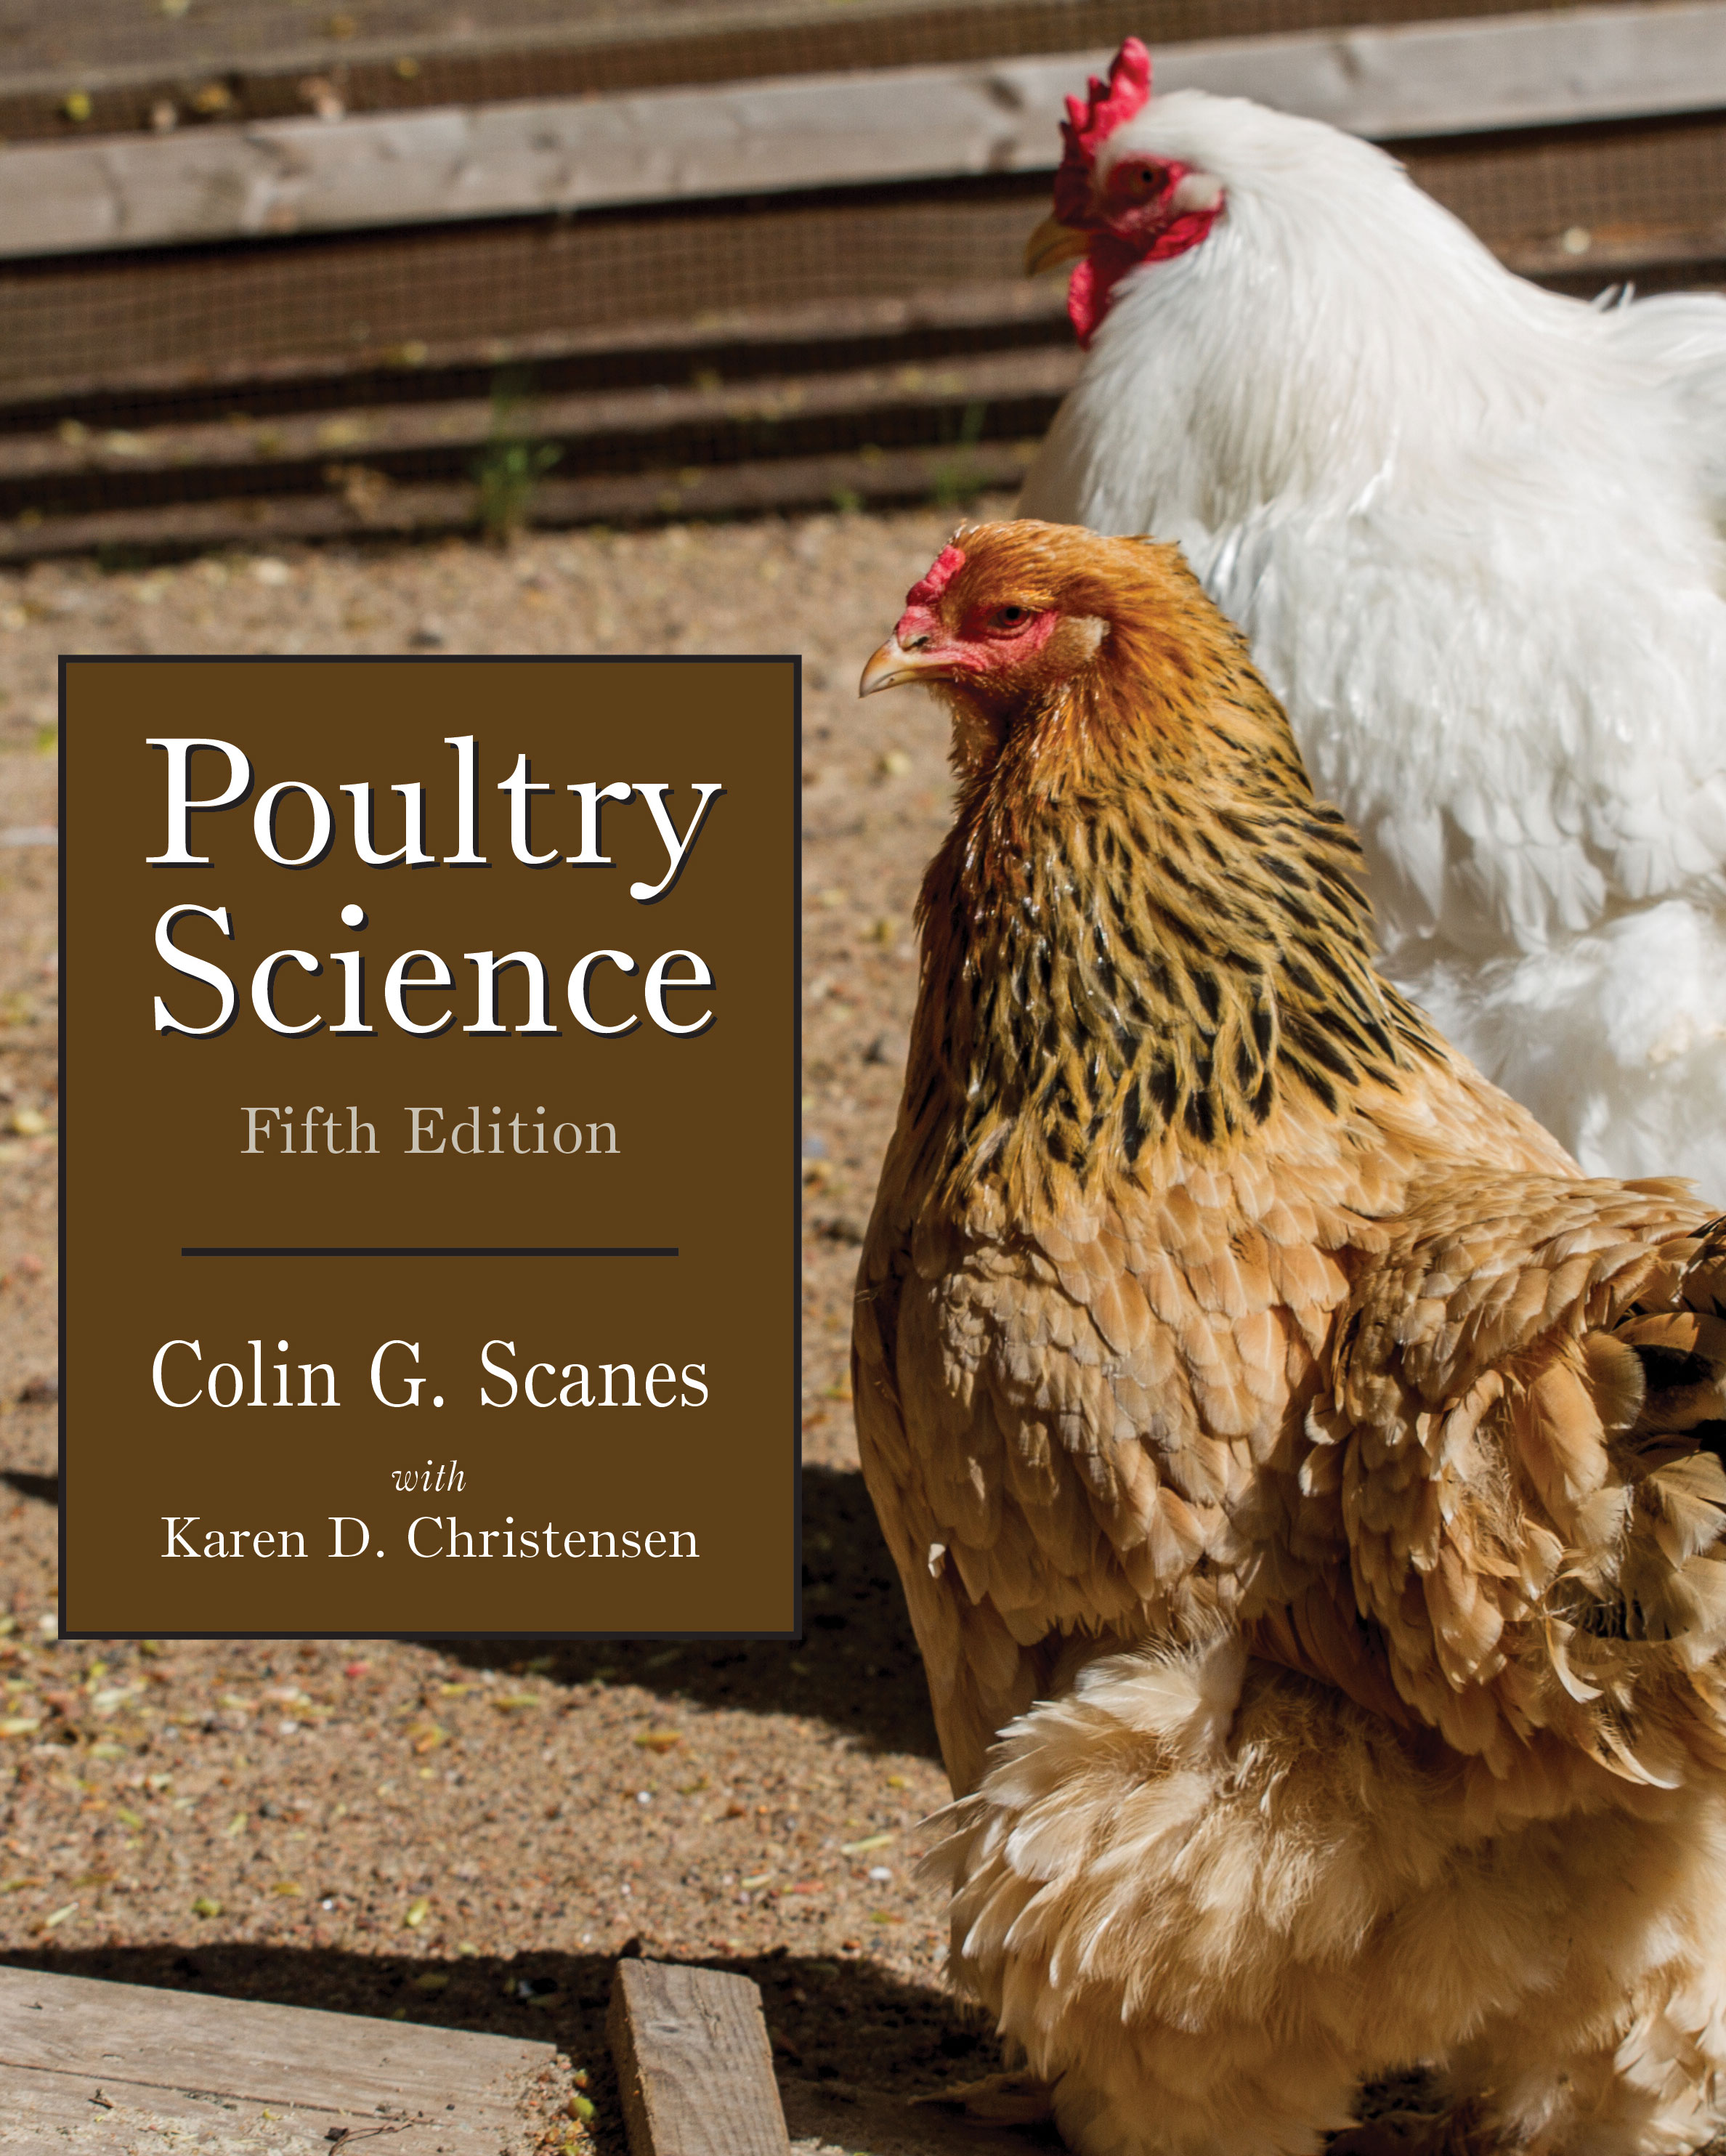 Poultry Science:  by Colin G. Scanes with Karen D. Christensen